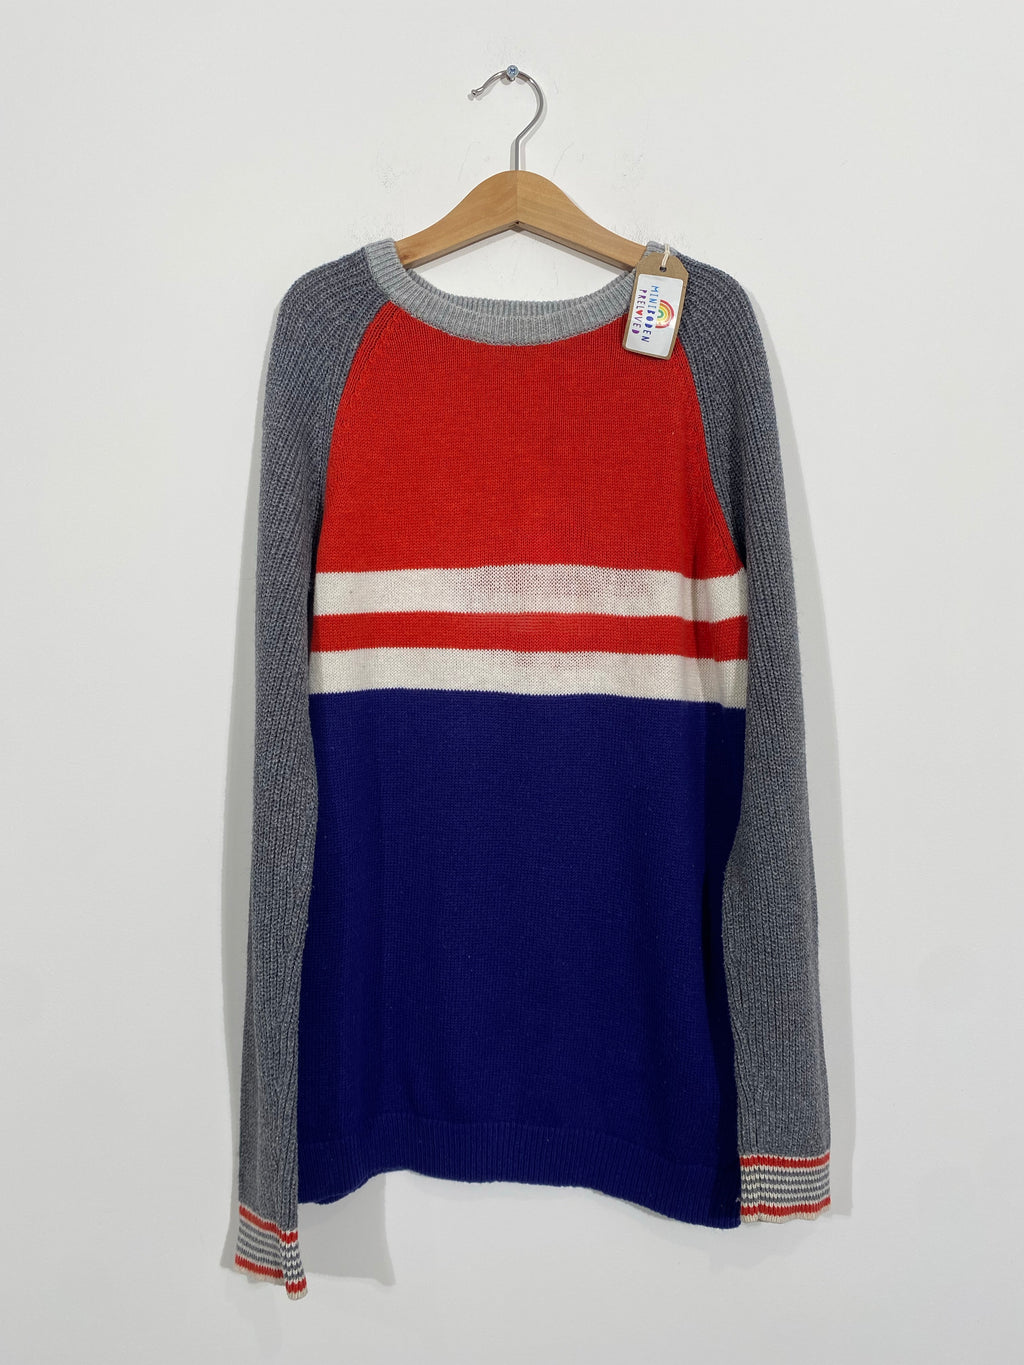 Navy & Red Knitted Jumper (11-12 Years)